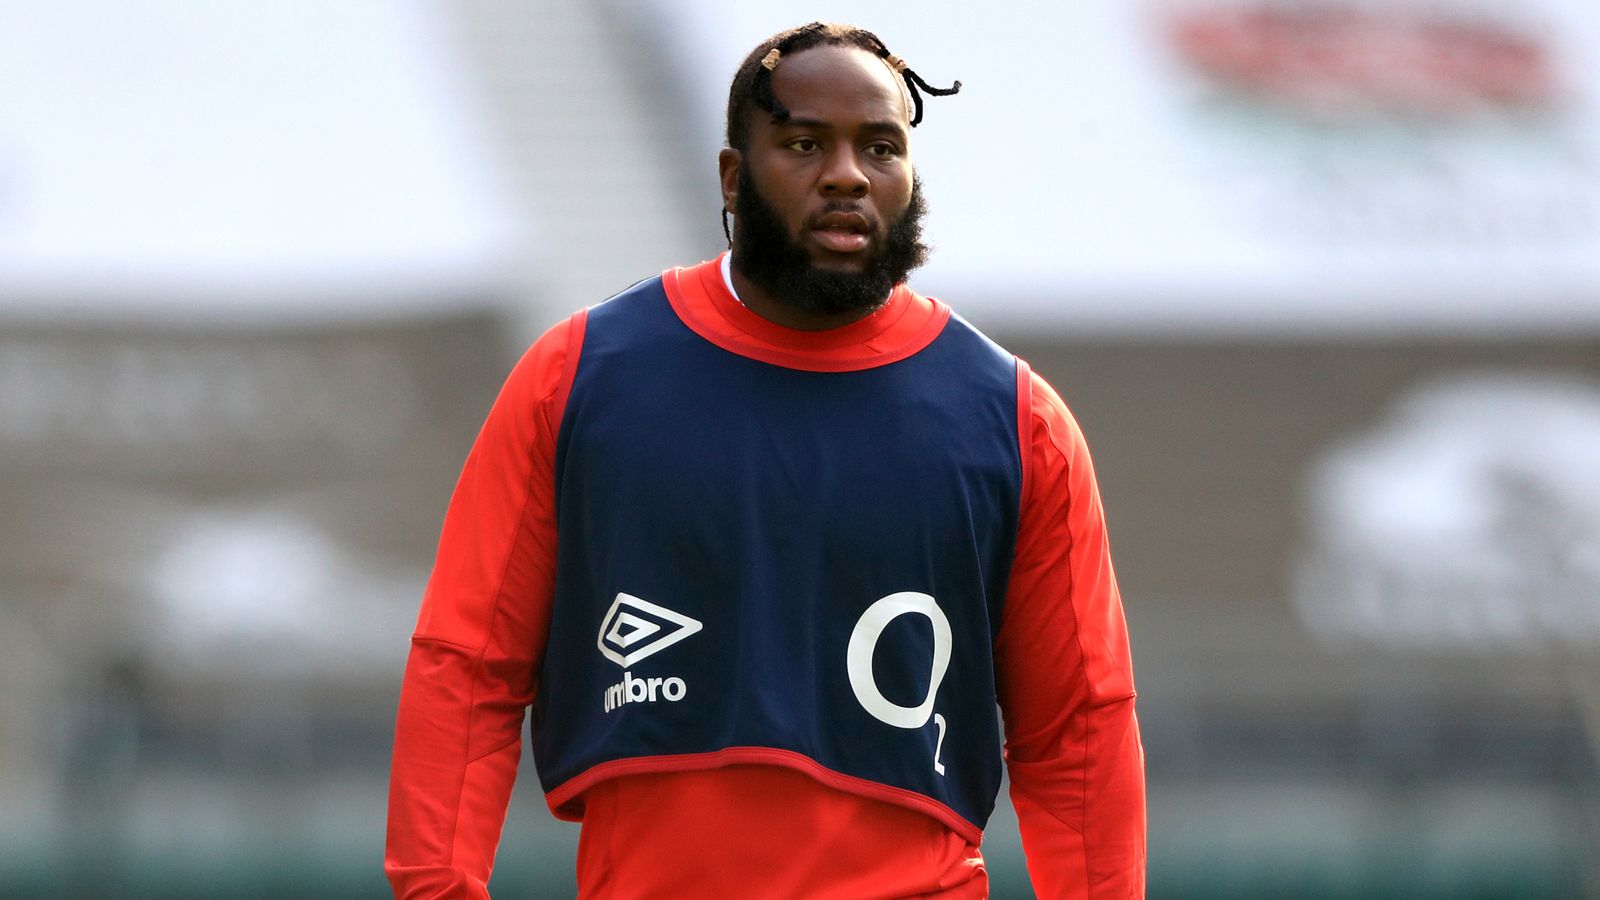 England Rugby World Cup training squad: Beno Obano, Will Joseph released | Billy Vunipola has minor knee surgery